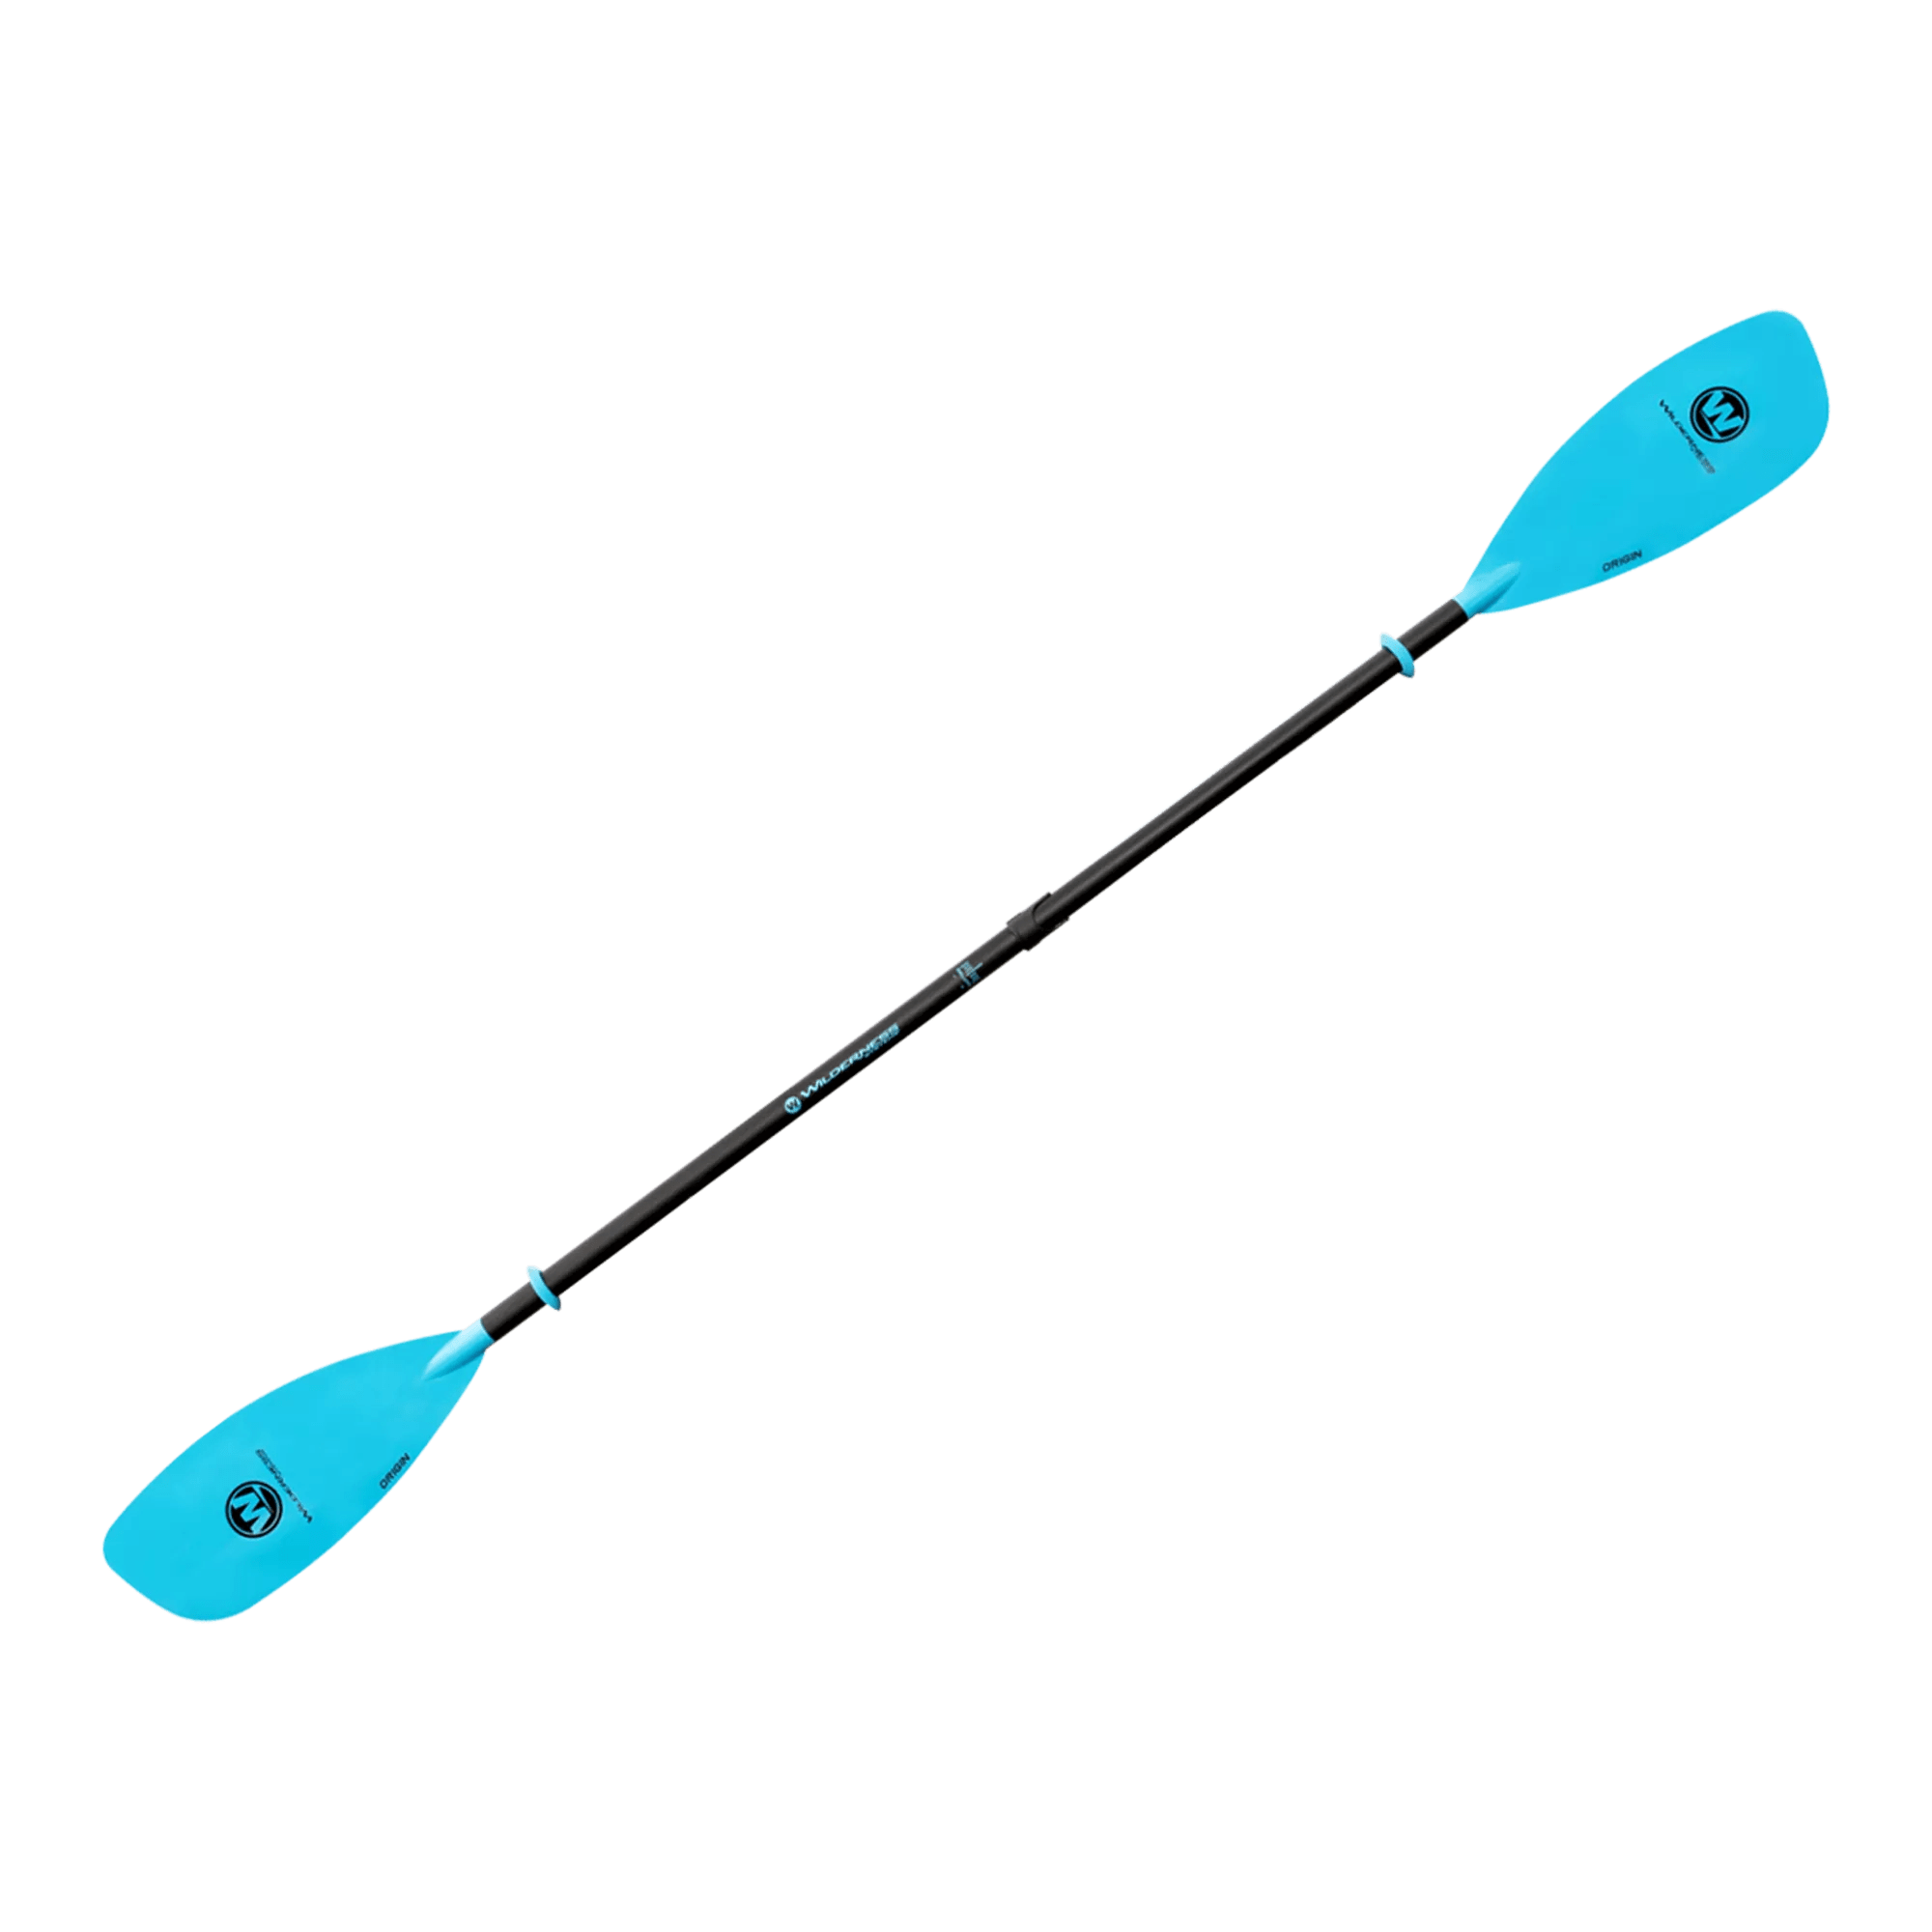 WILDERNESS SYSTEMS - Origin Glass Touring Paddle 205-225 cm - Blue - 8070225 - ISO